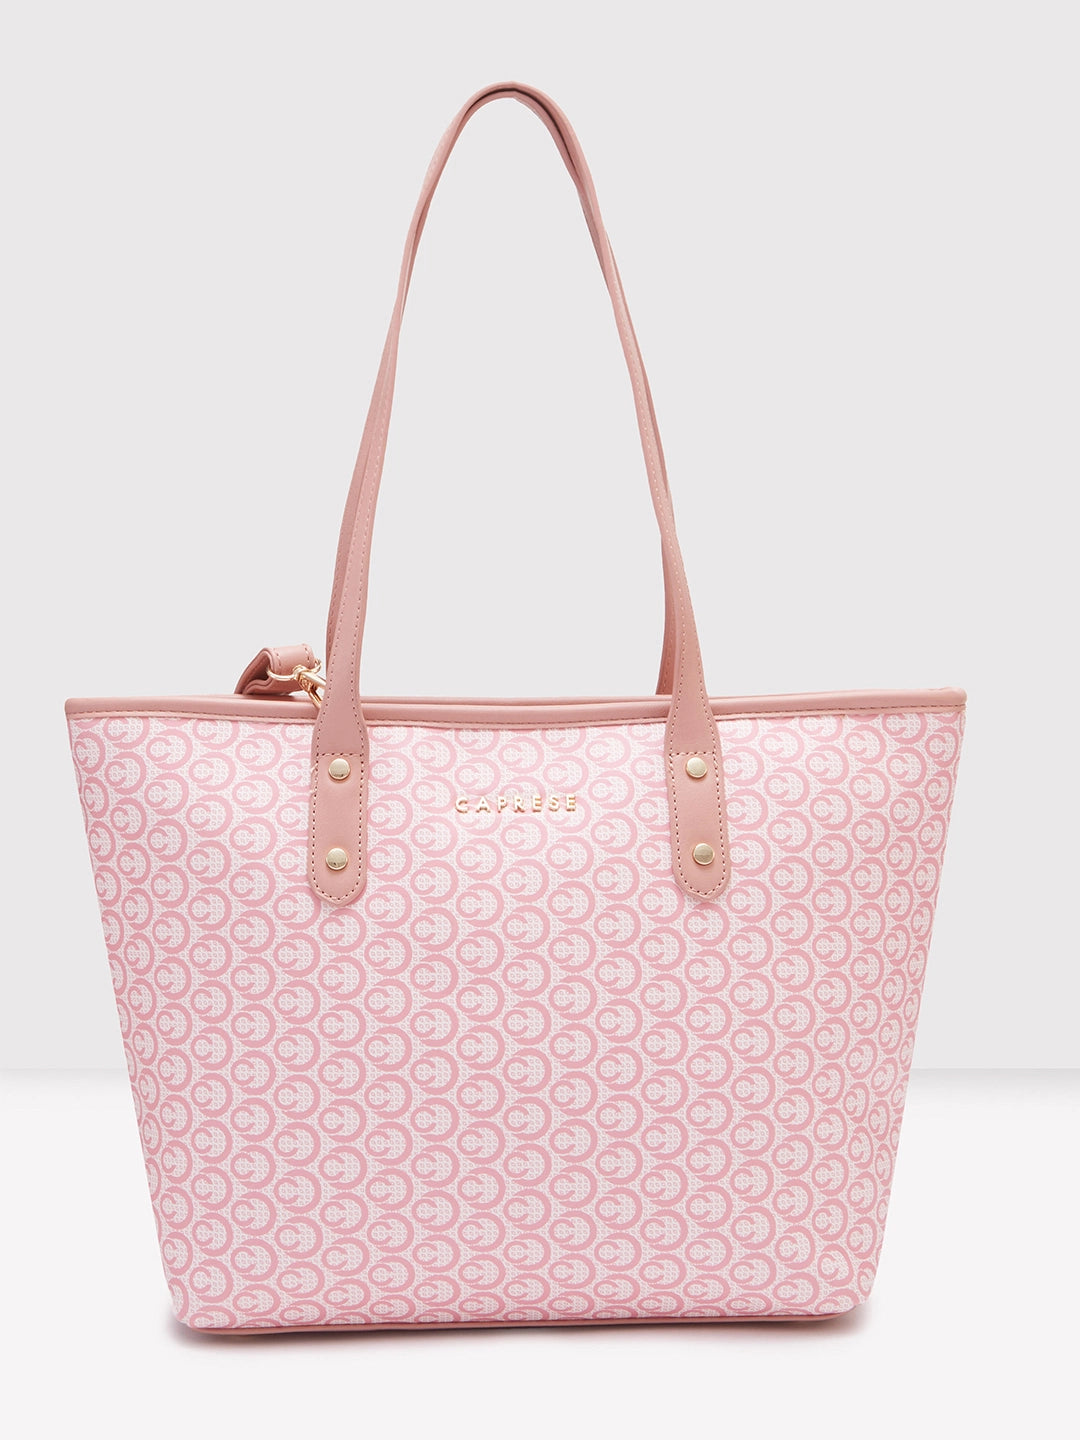 Gucci Pink Dollar Bag : Luxury Reveal | Pink gucci bag, Gucci handbags pink,  Pink handbags